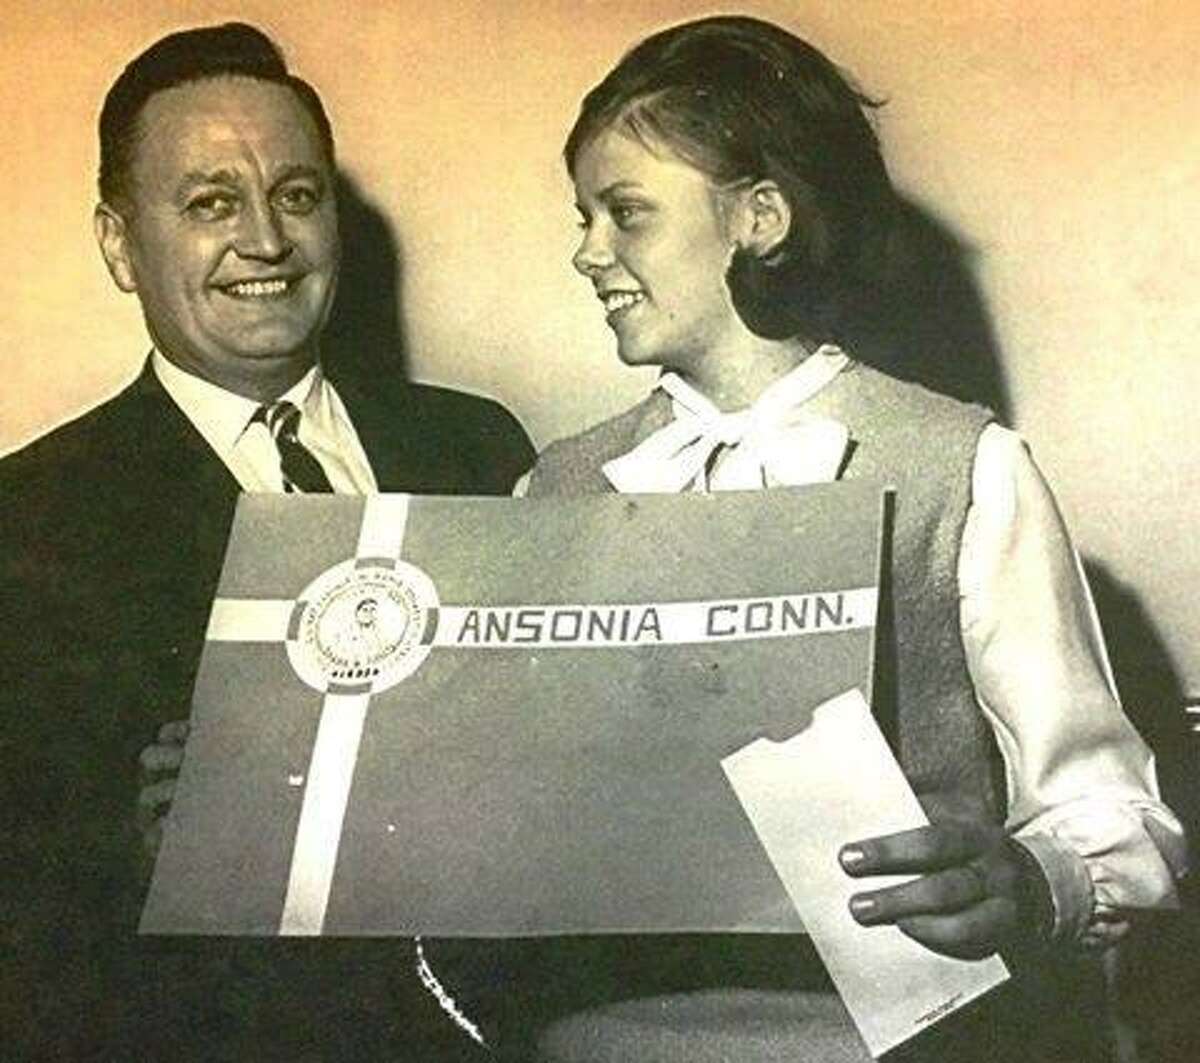 Former Ansonia Mayor Joseph Doyle presents Nancy Busk with a $25 savings bond in 1965 for her design of the city’s flag